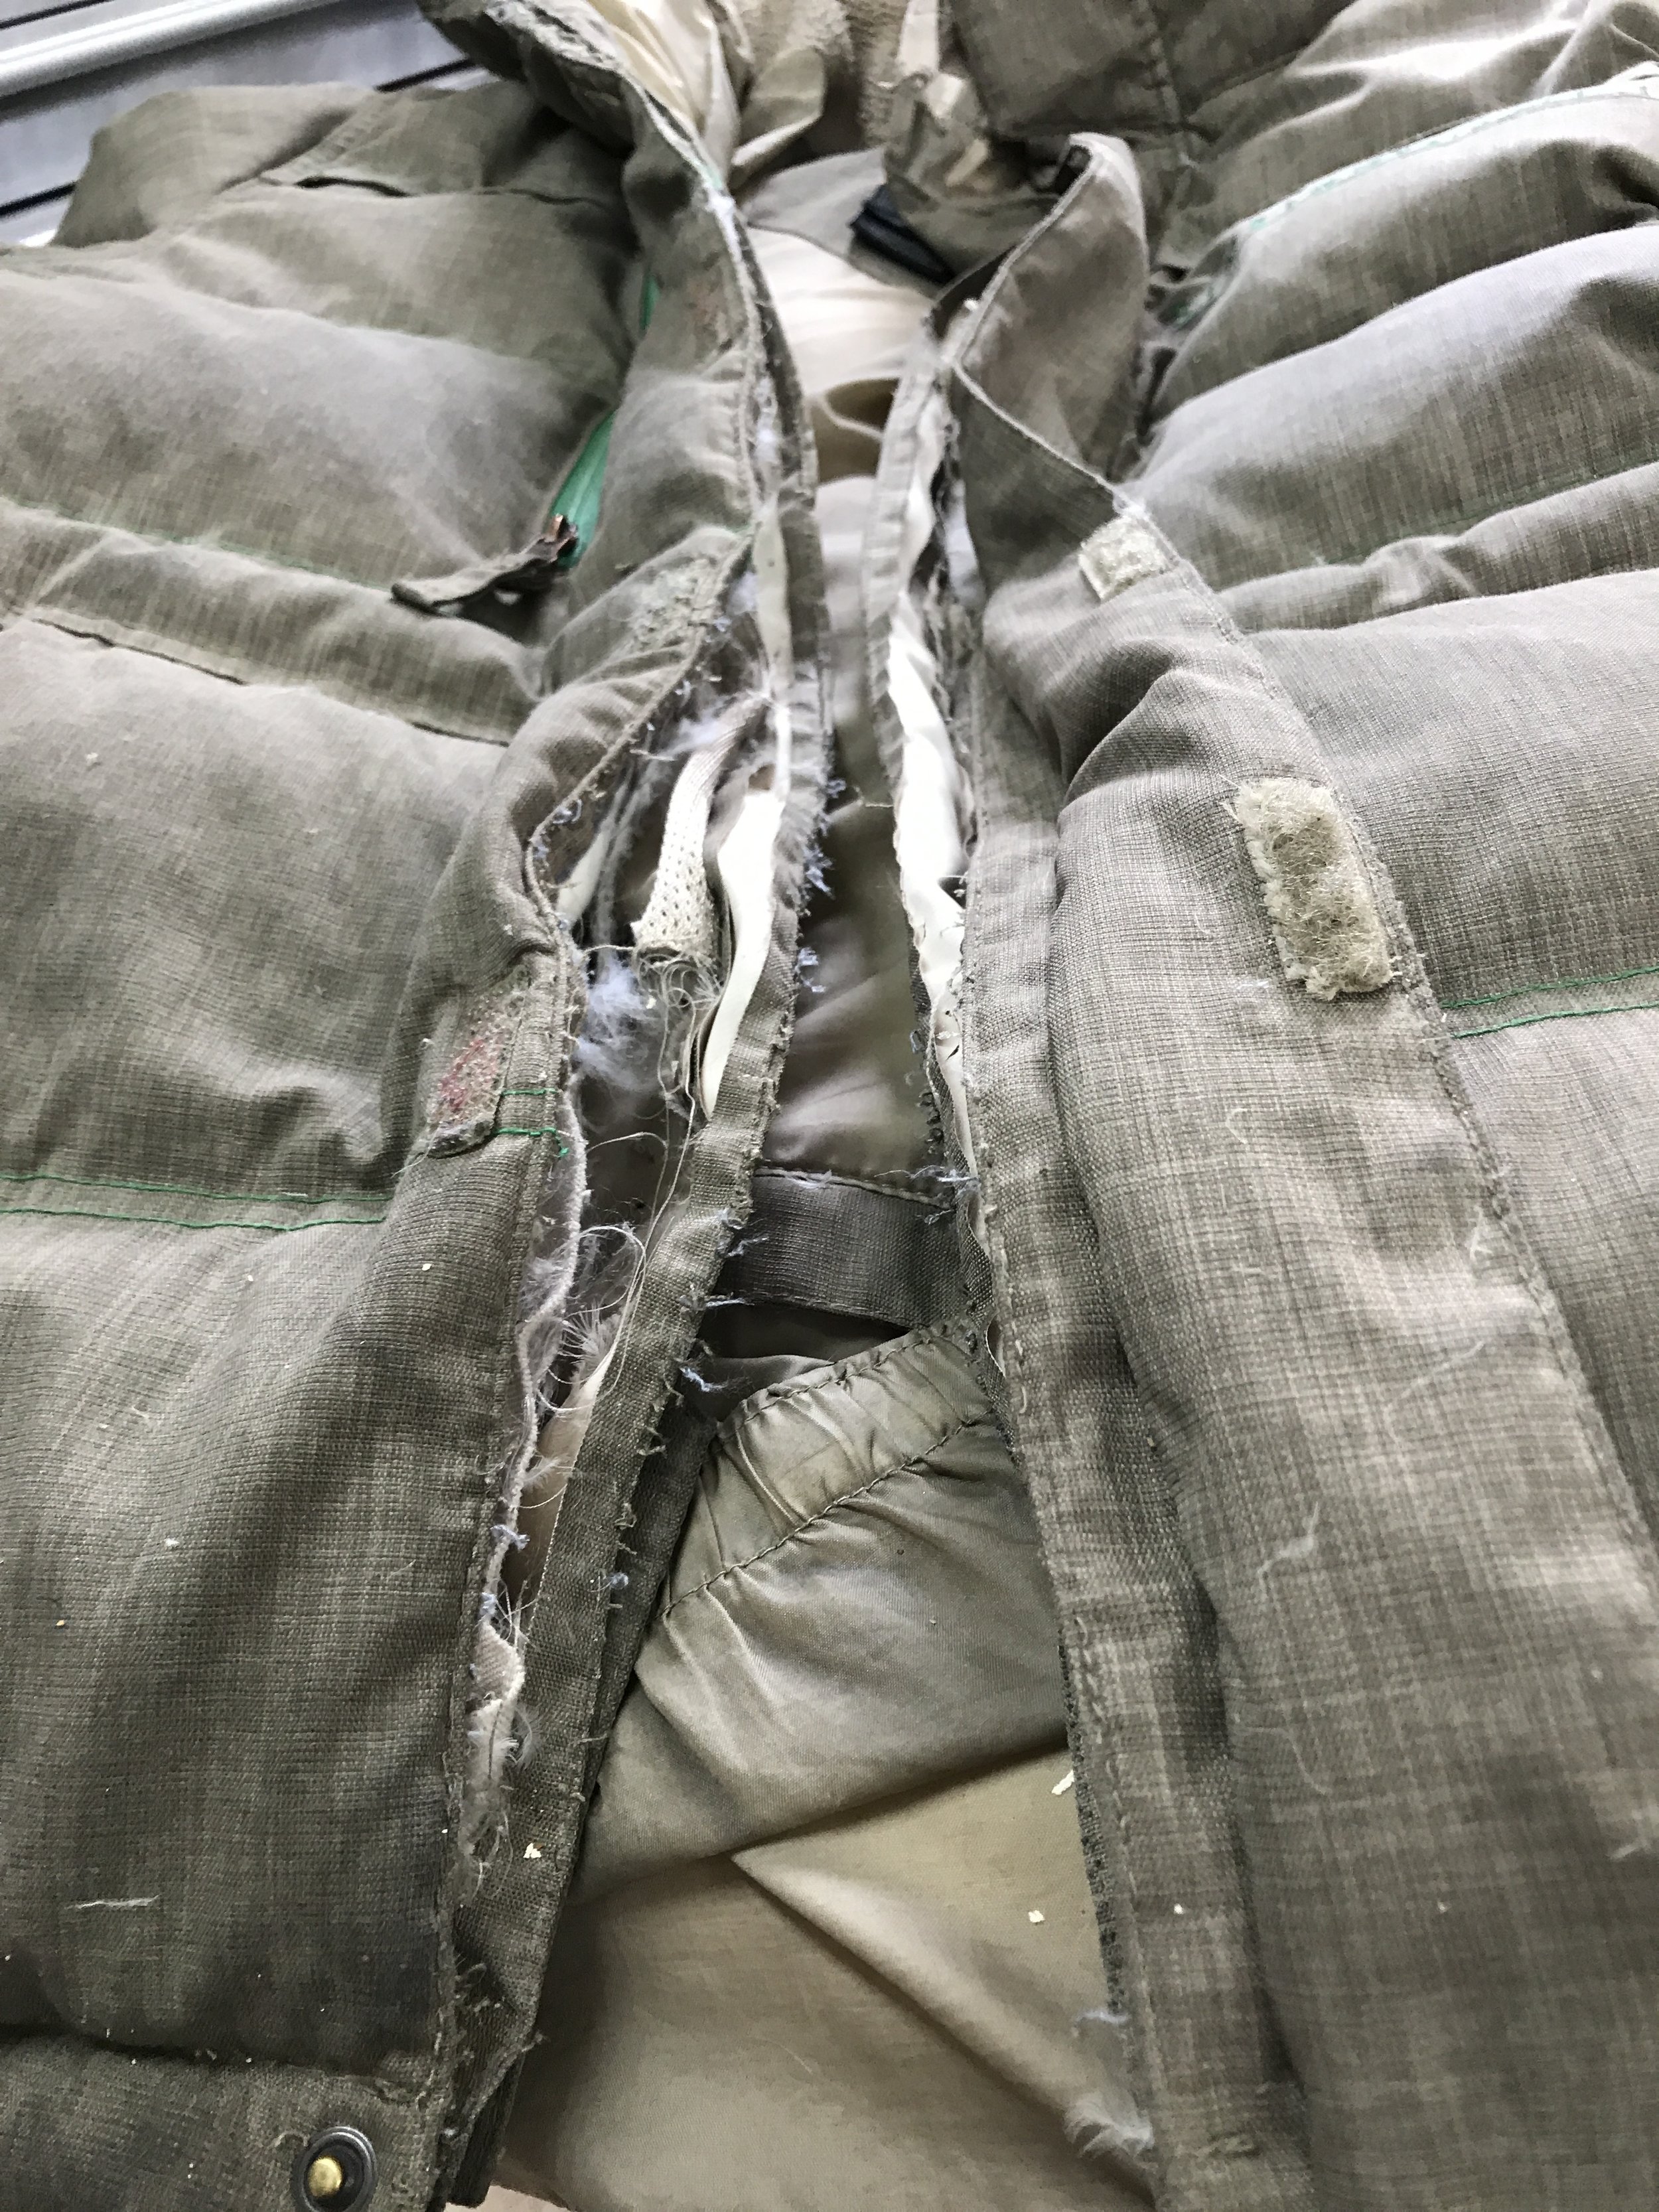 Outdoor Gear Repair - The Fixed Line - Replace Zippers in jackets, tents,  backpacks